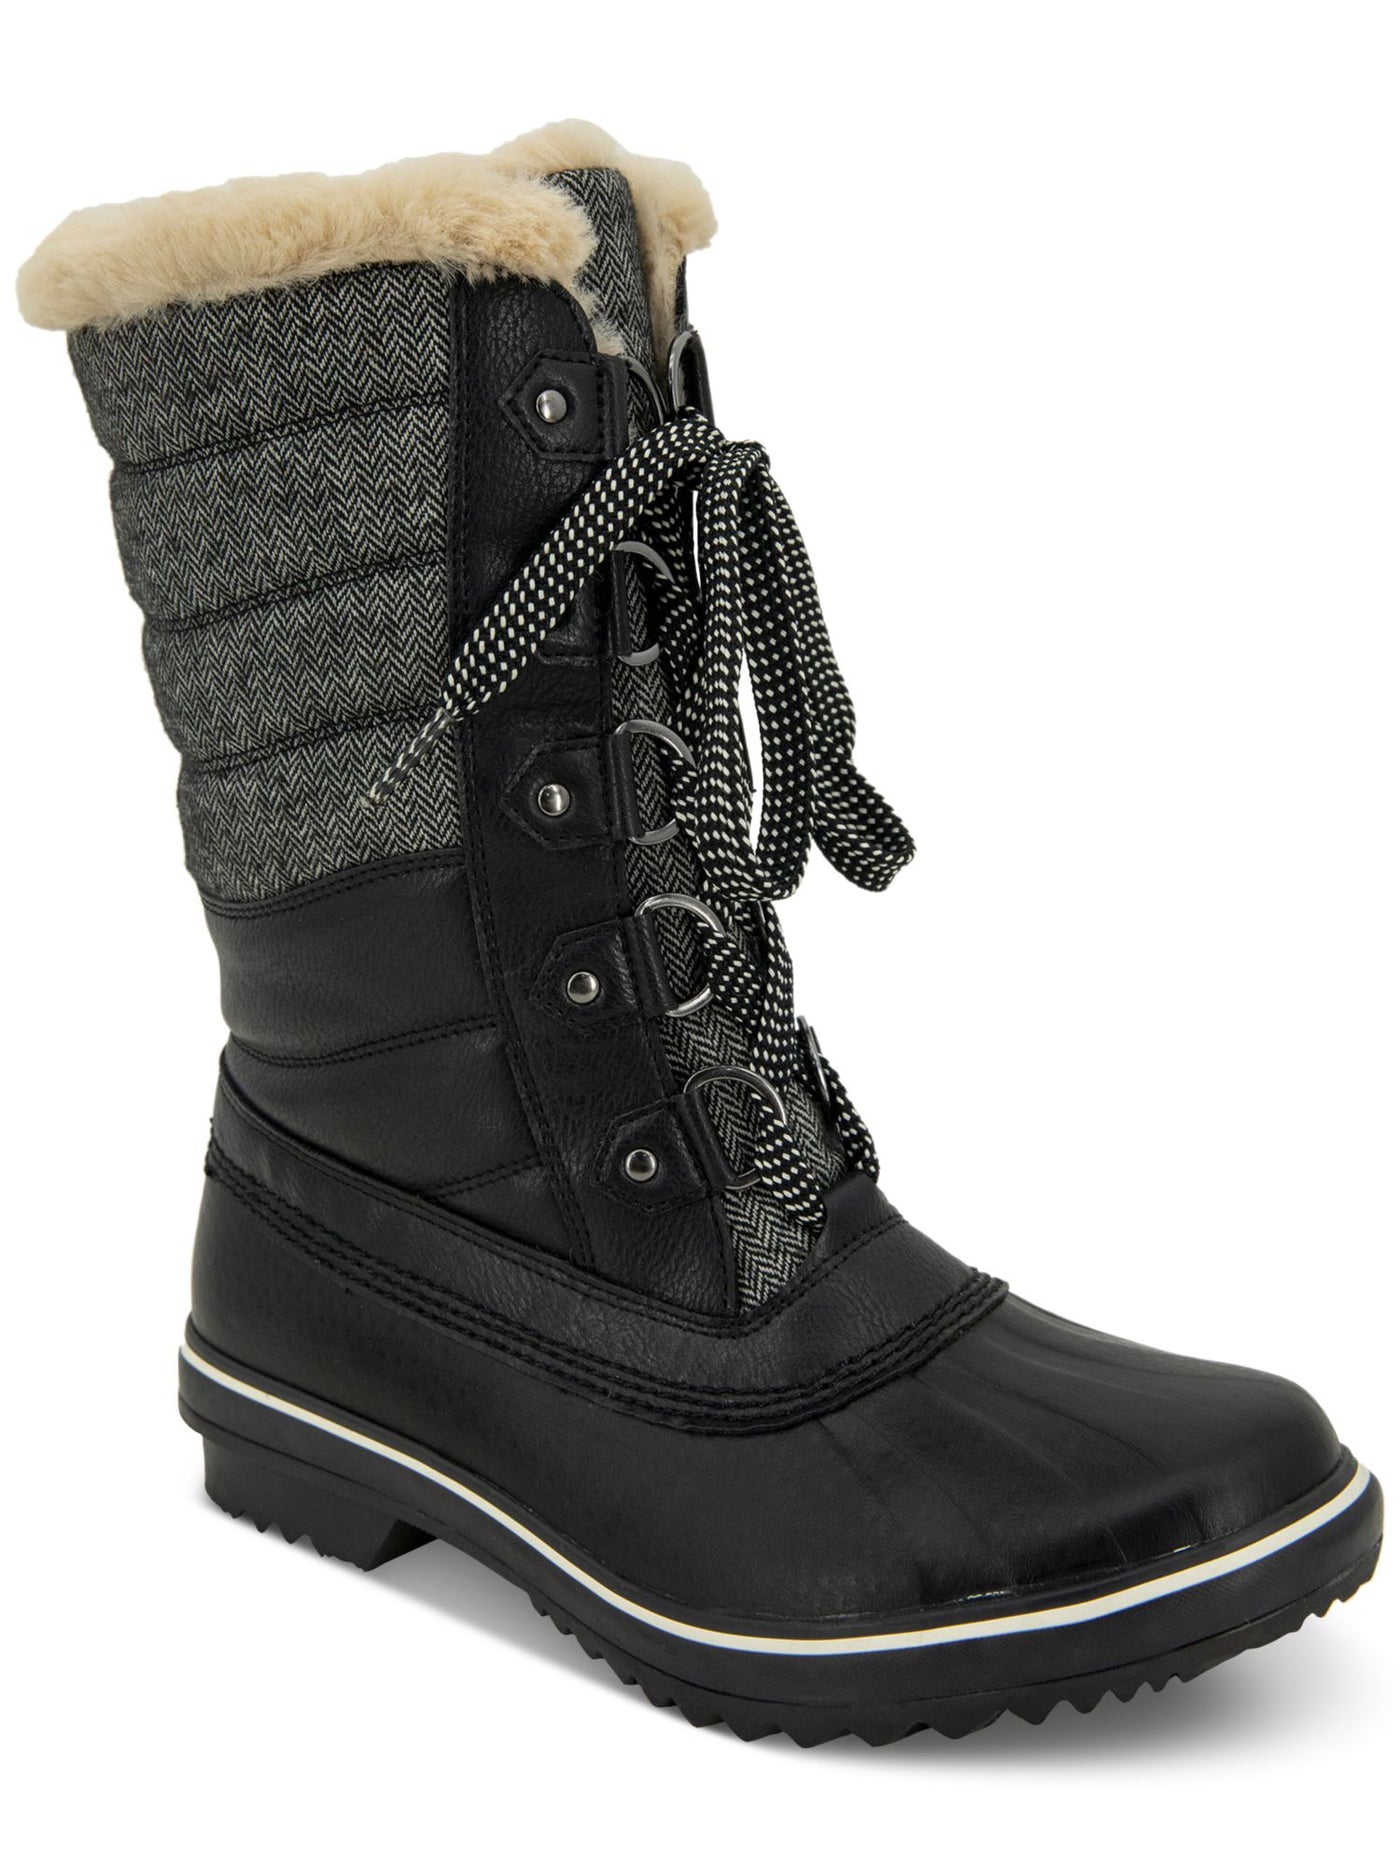 JBU BY JAMBU Womens Black Water Resistant Quilted Siberia Round Toe Lace-Up Winter 11